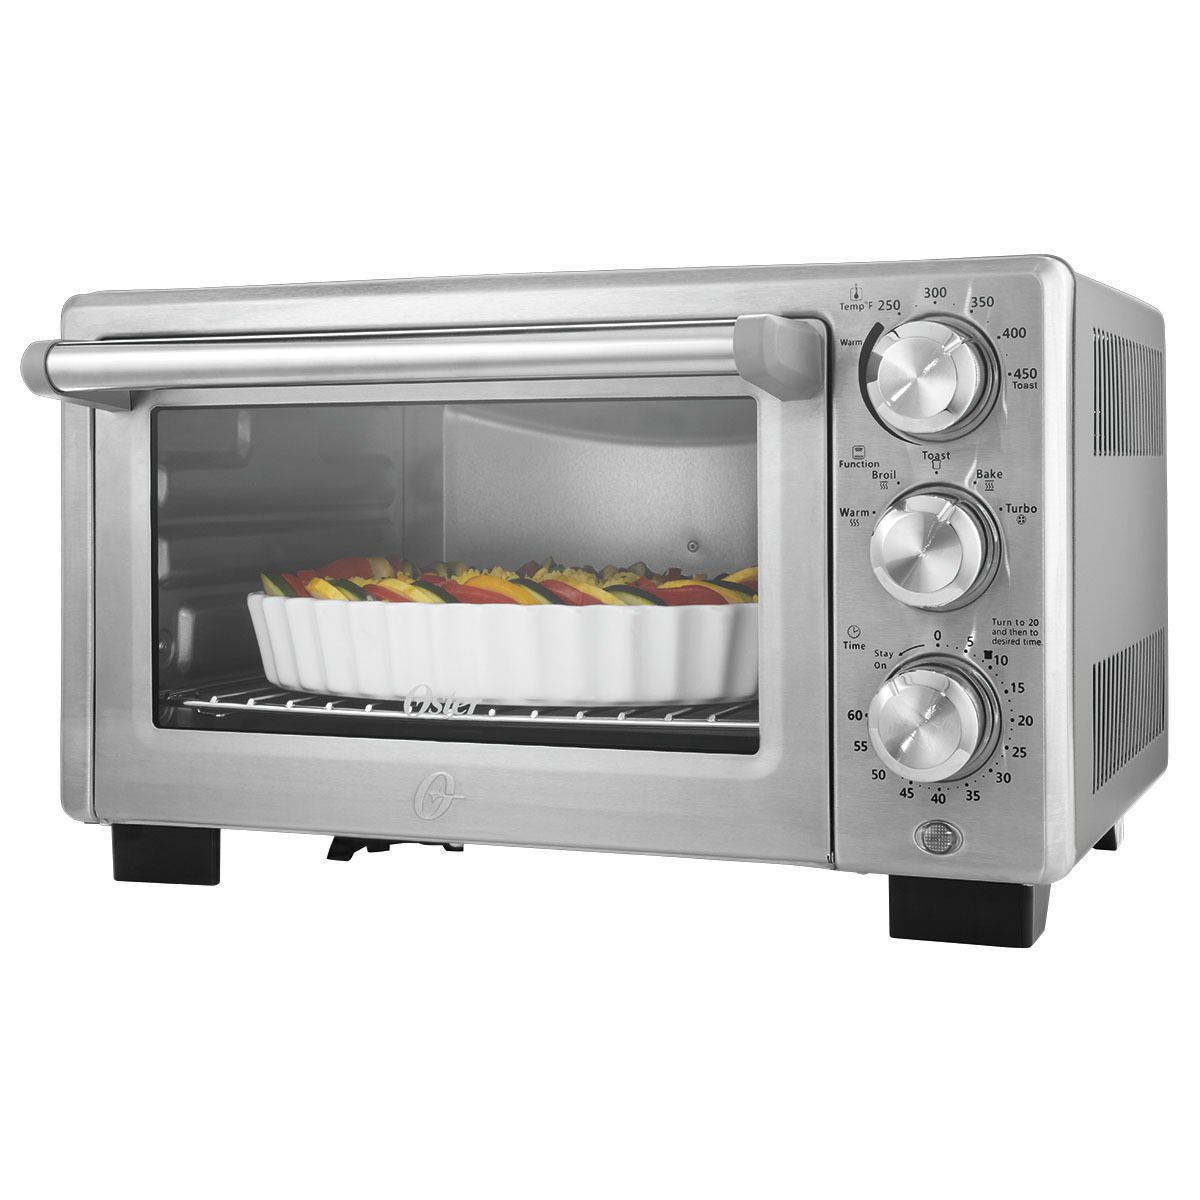 An image of Oster TSSTTVDFL2 Stainless Steel Countertop Toaster Oven